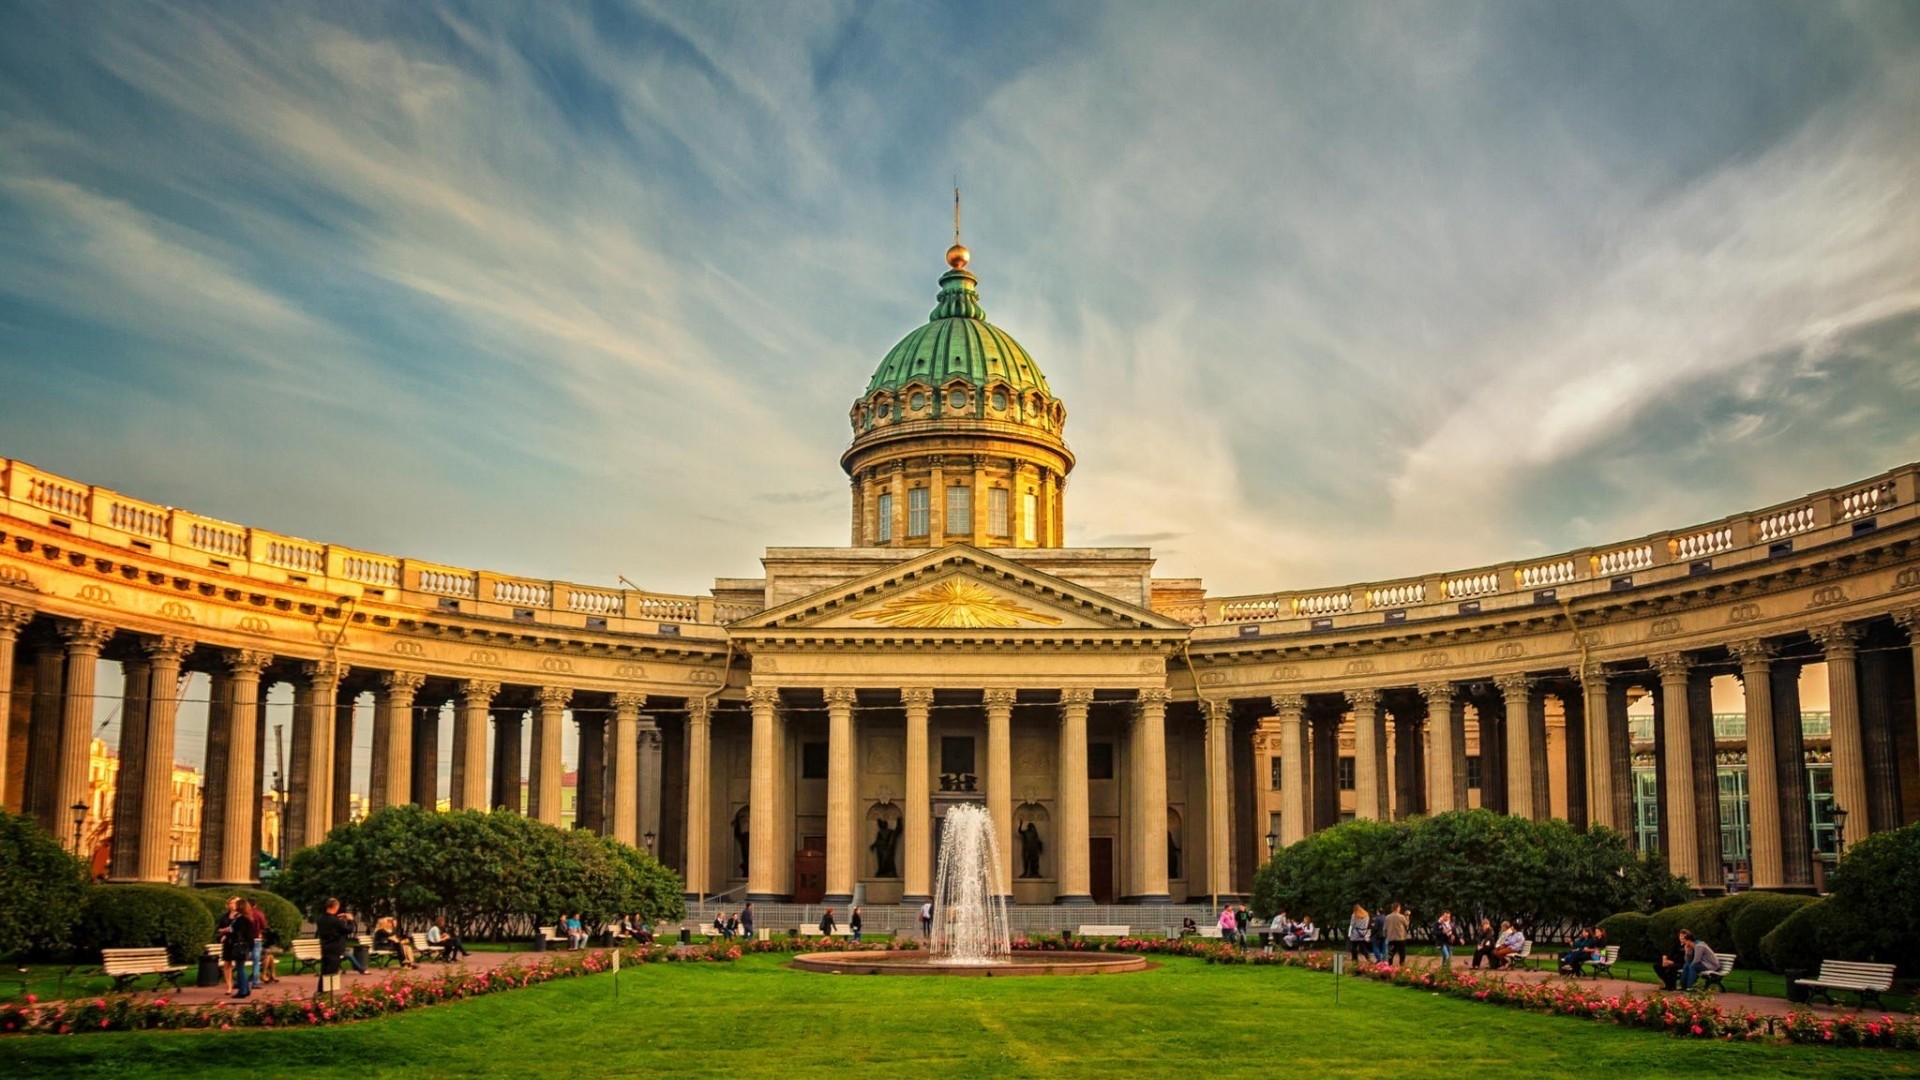 The Kazan Cathedral Form St Petersburg Russia Wallpaper ...